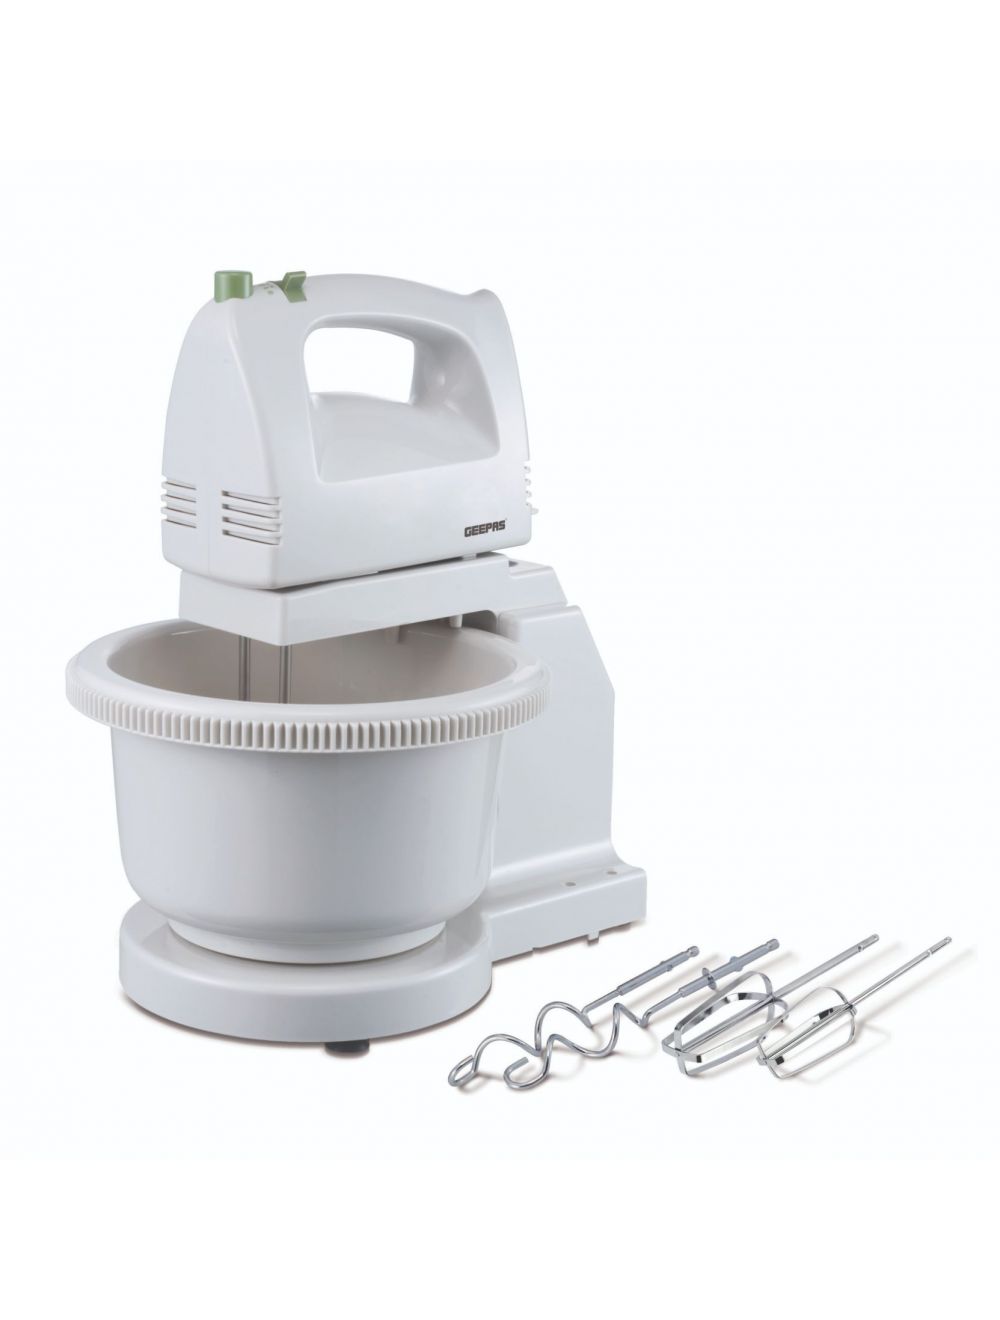 Geepas GHB2002 Hand Mixer With Stand Bowl White